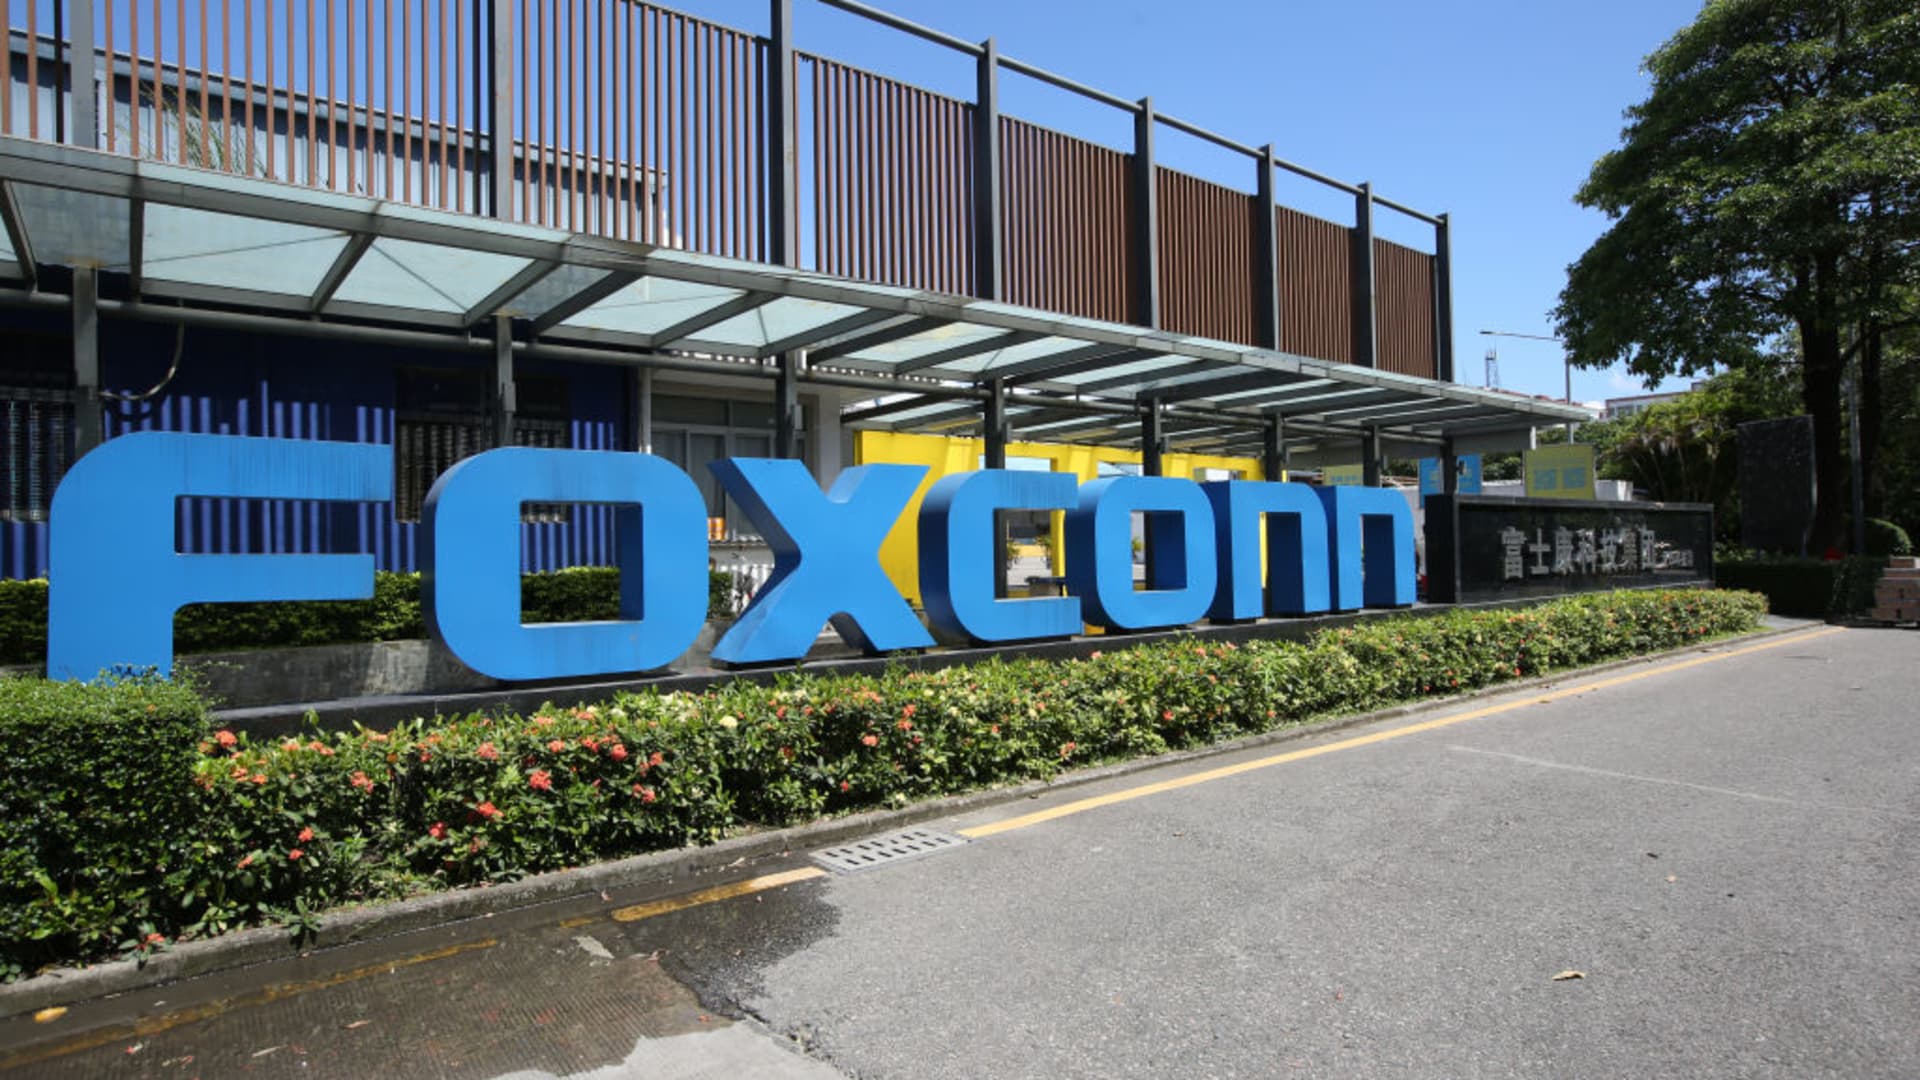 The Foxconn factory campus in Longhua town, Shenzhen, China.